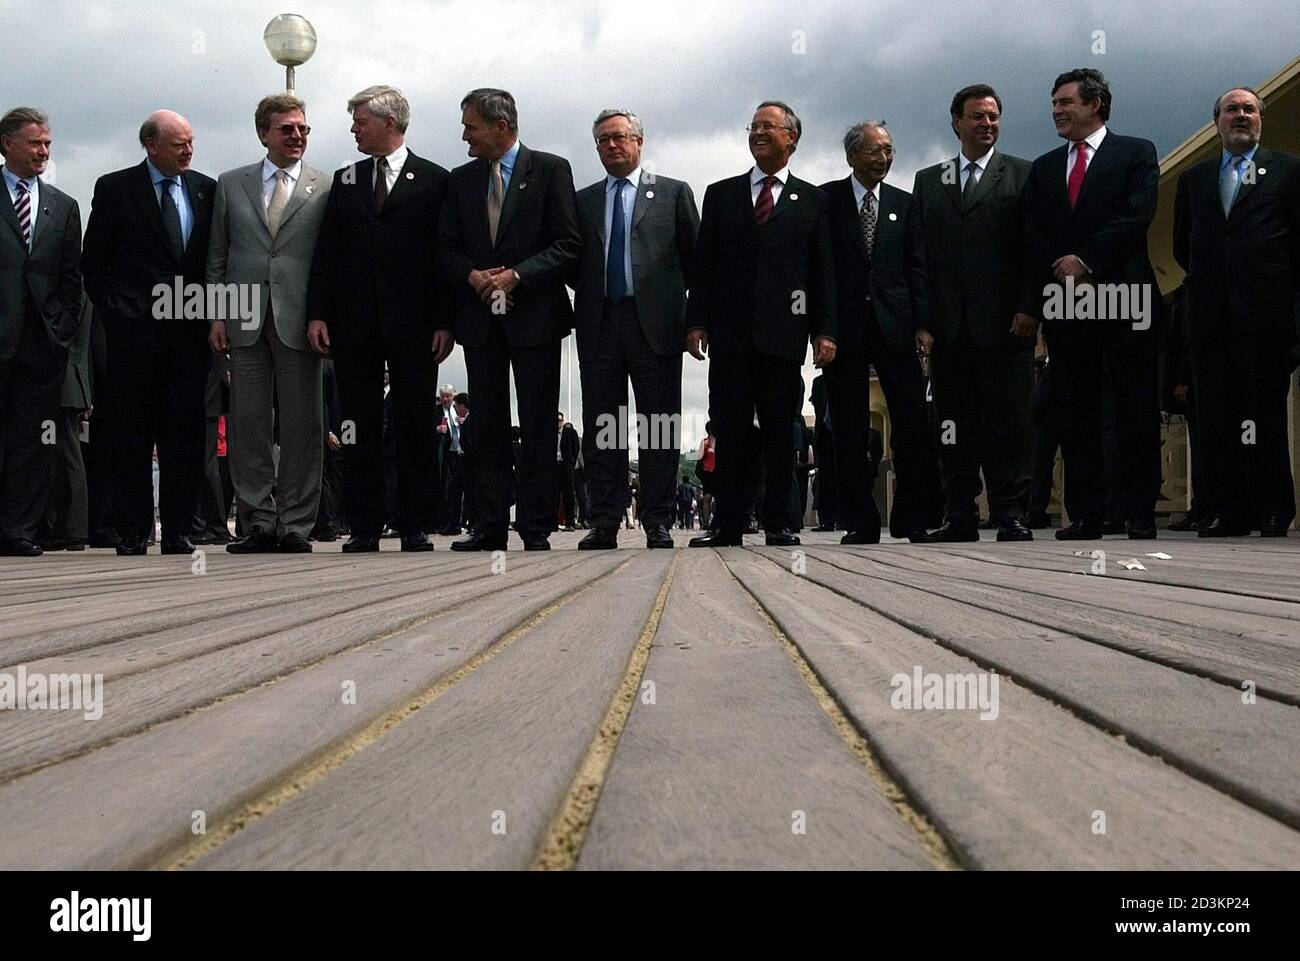 G7 Finance ministers pose for a family photo on the famous promenade ' les planches' in Deauville, Western France, May 17, 2003.  Faced with faltering economies in Europe and Japan and a sliding U.S. dollar, the meeting of ministers from the Group of Seven (G7) club was teeing up the economic agenda for a summit in the French town of Evian in June with longer-term objectives. (L-R) International Monetary Fund General Director Horst Koehler, US treasury Secretary John Snow, Russian minister Alexei Koudrine, Canadian minister John Manley, French minister Francis Mer, Italian minister Giulio Trem Stock Photo